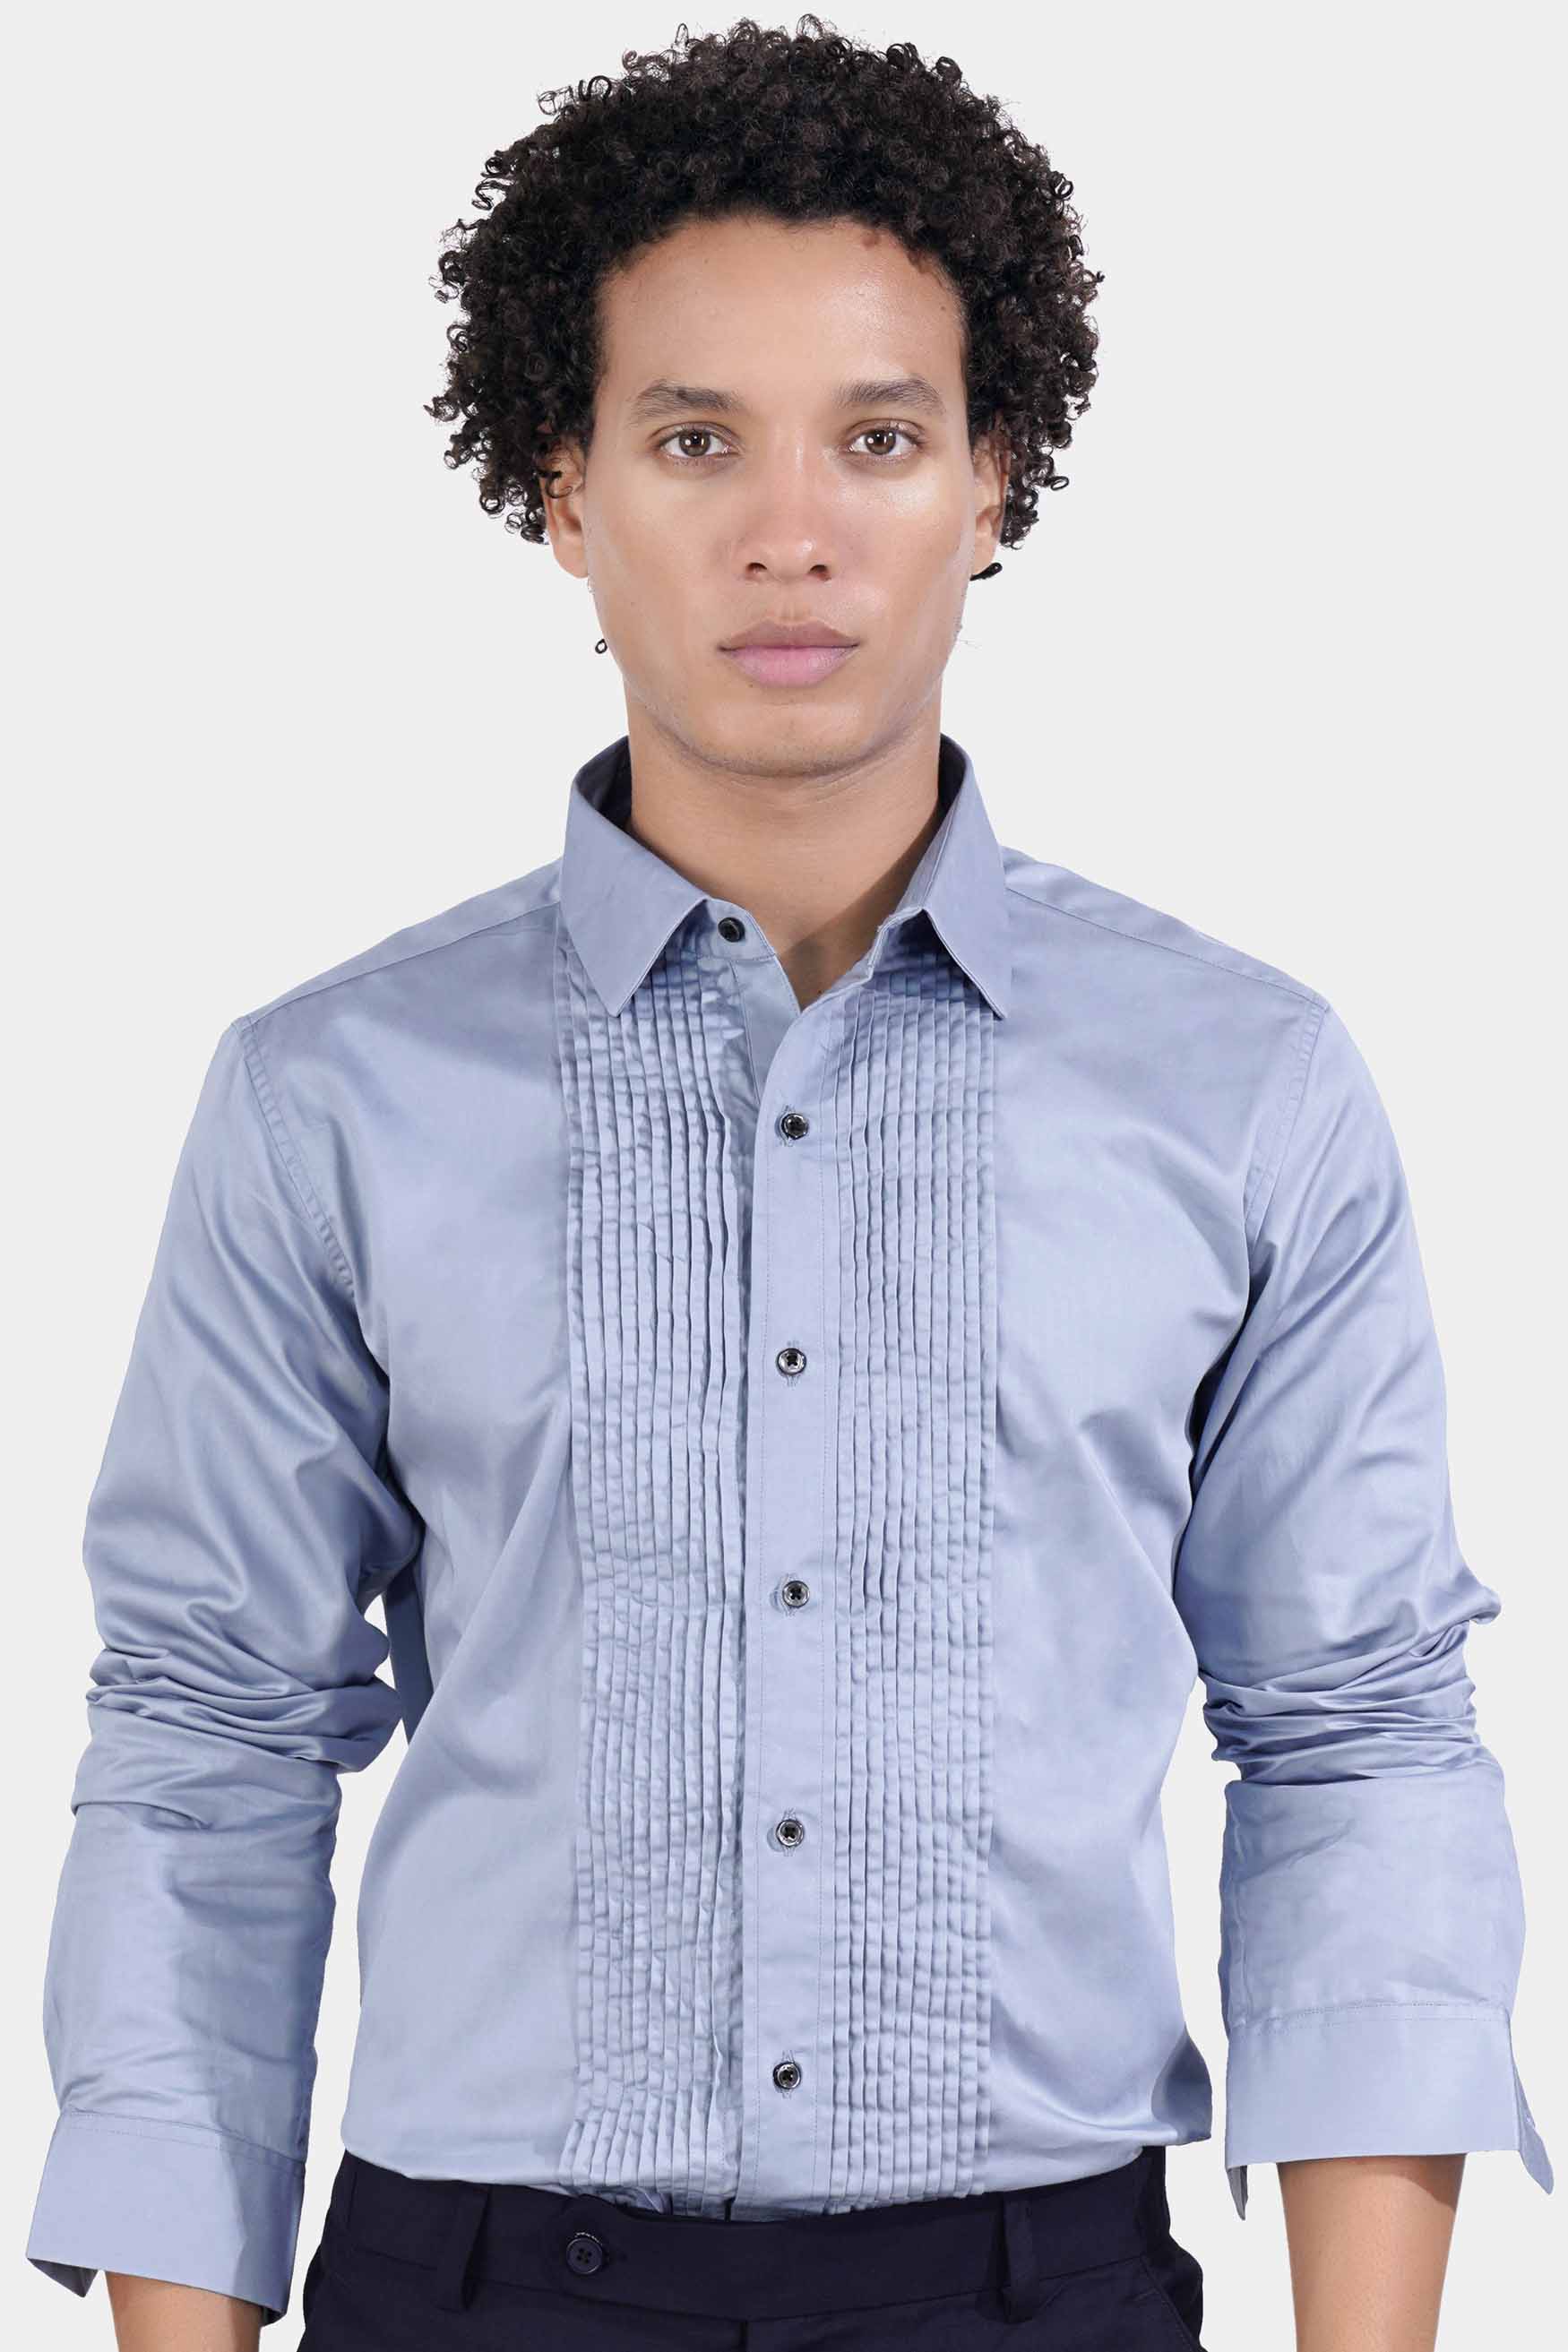 Shirt and Pant Combo 10 (Navy Blue Shirt and White Pant) – Cloth Culture